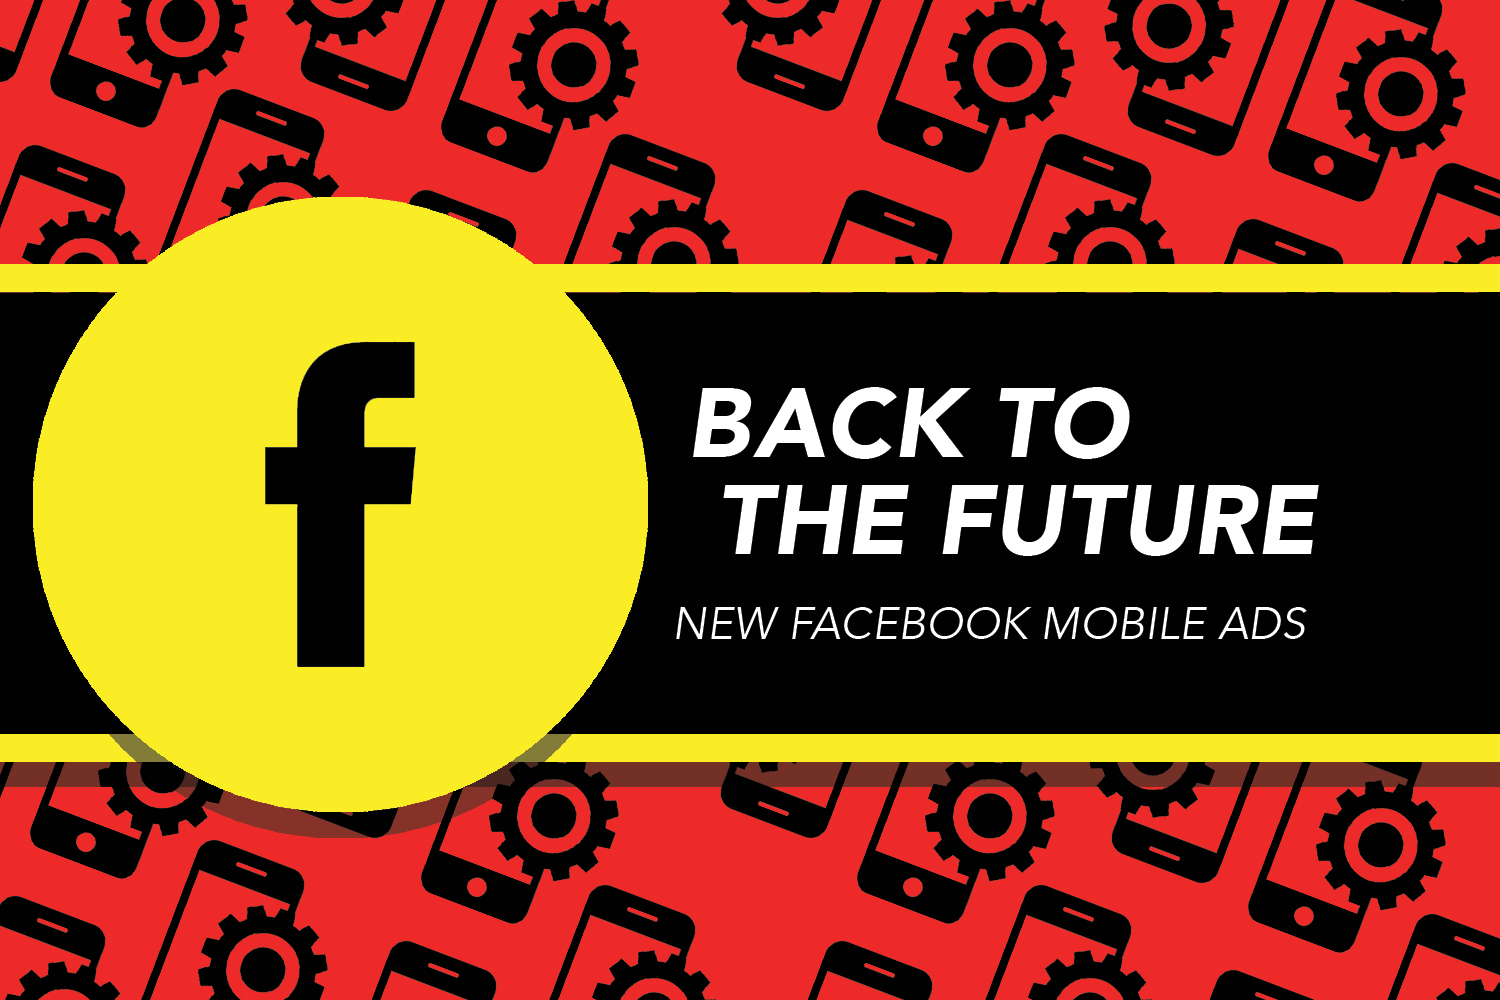 Back to the Future: Facebook Ads - BYK Blog